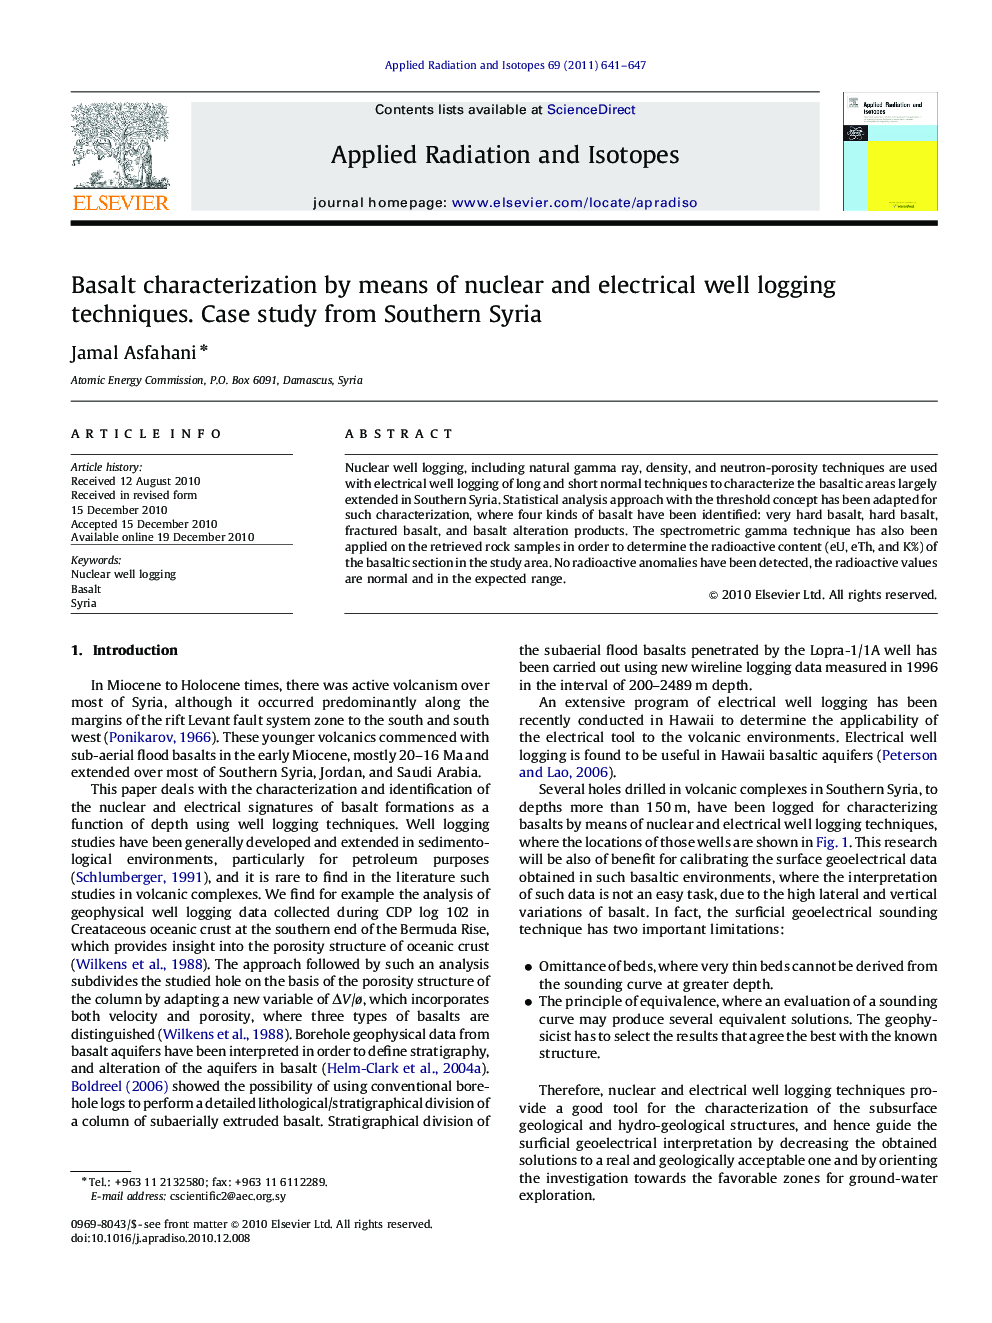 Basalt characterization by means of nuclear and electrical well logging techniques. Case study from Southern Syria